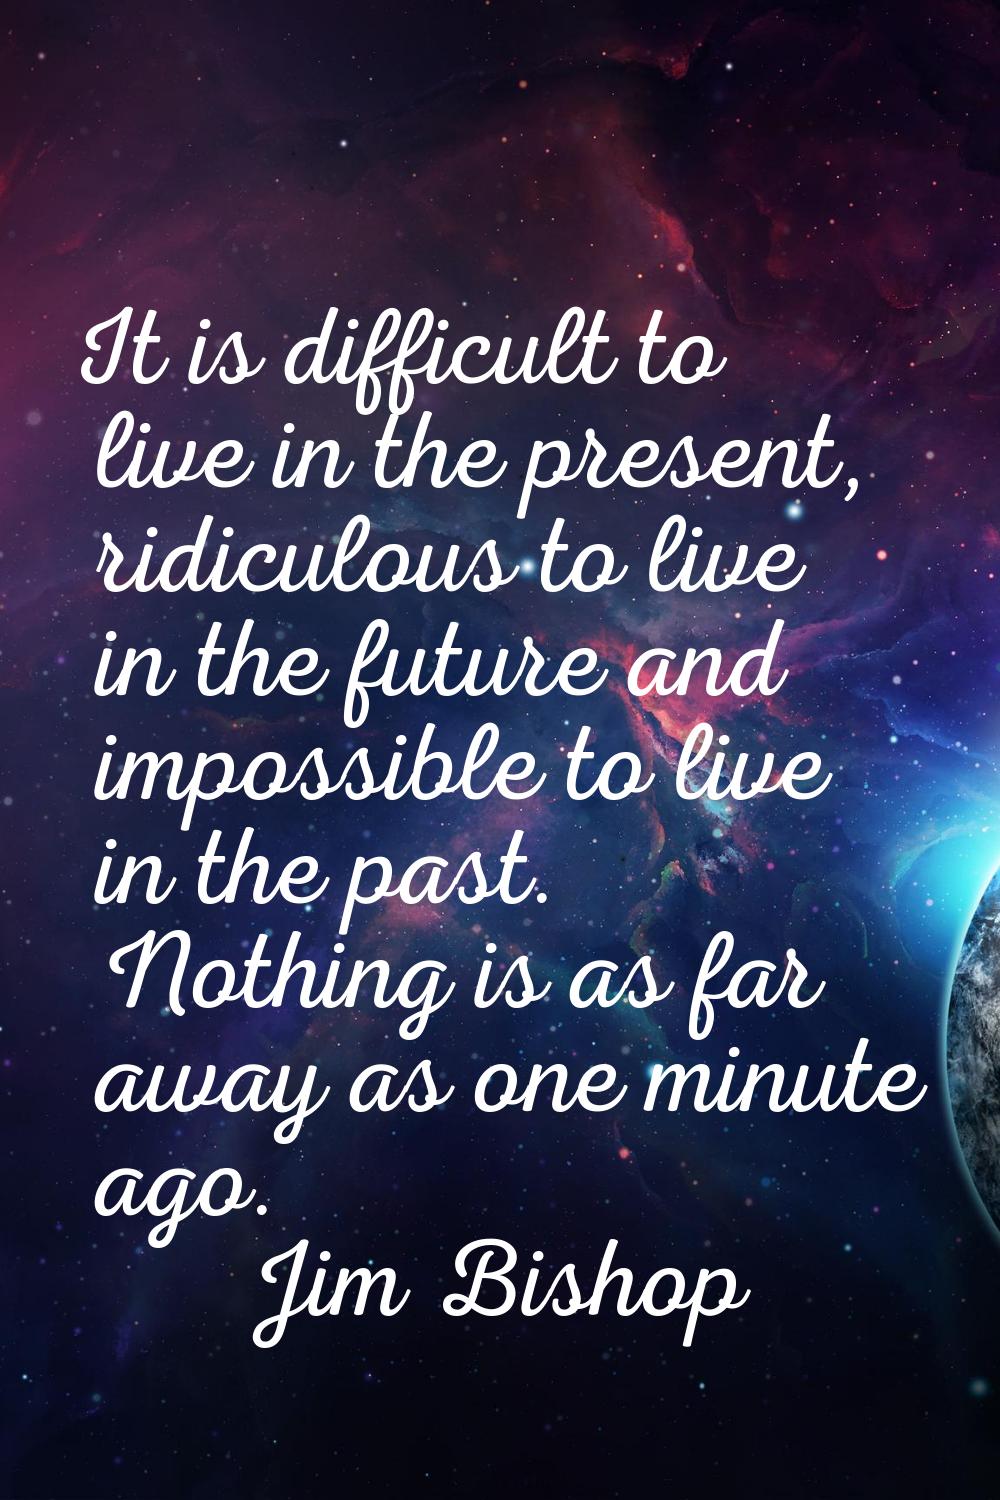 It is difficult to live in the present, ridiculous to live in the future and impossible to live in 